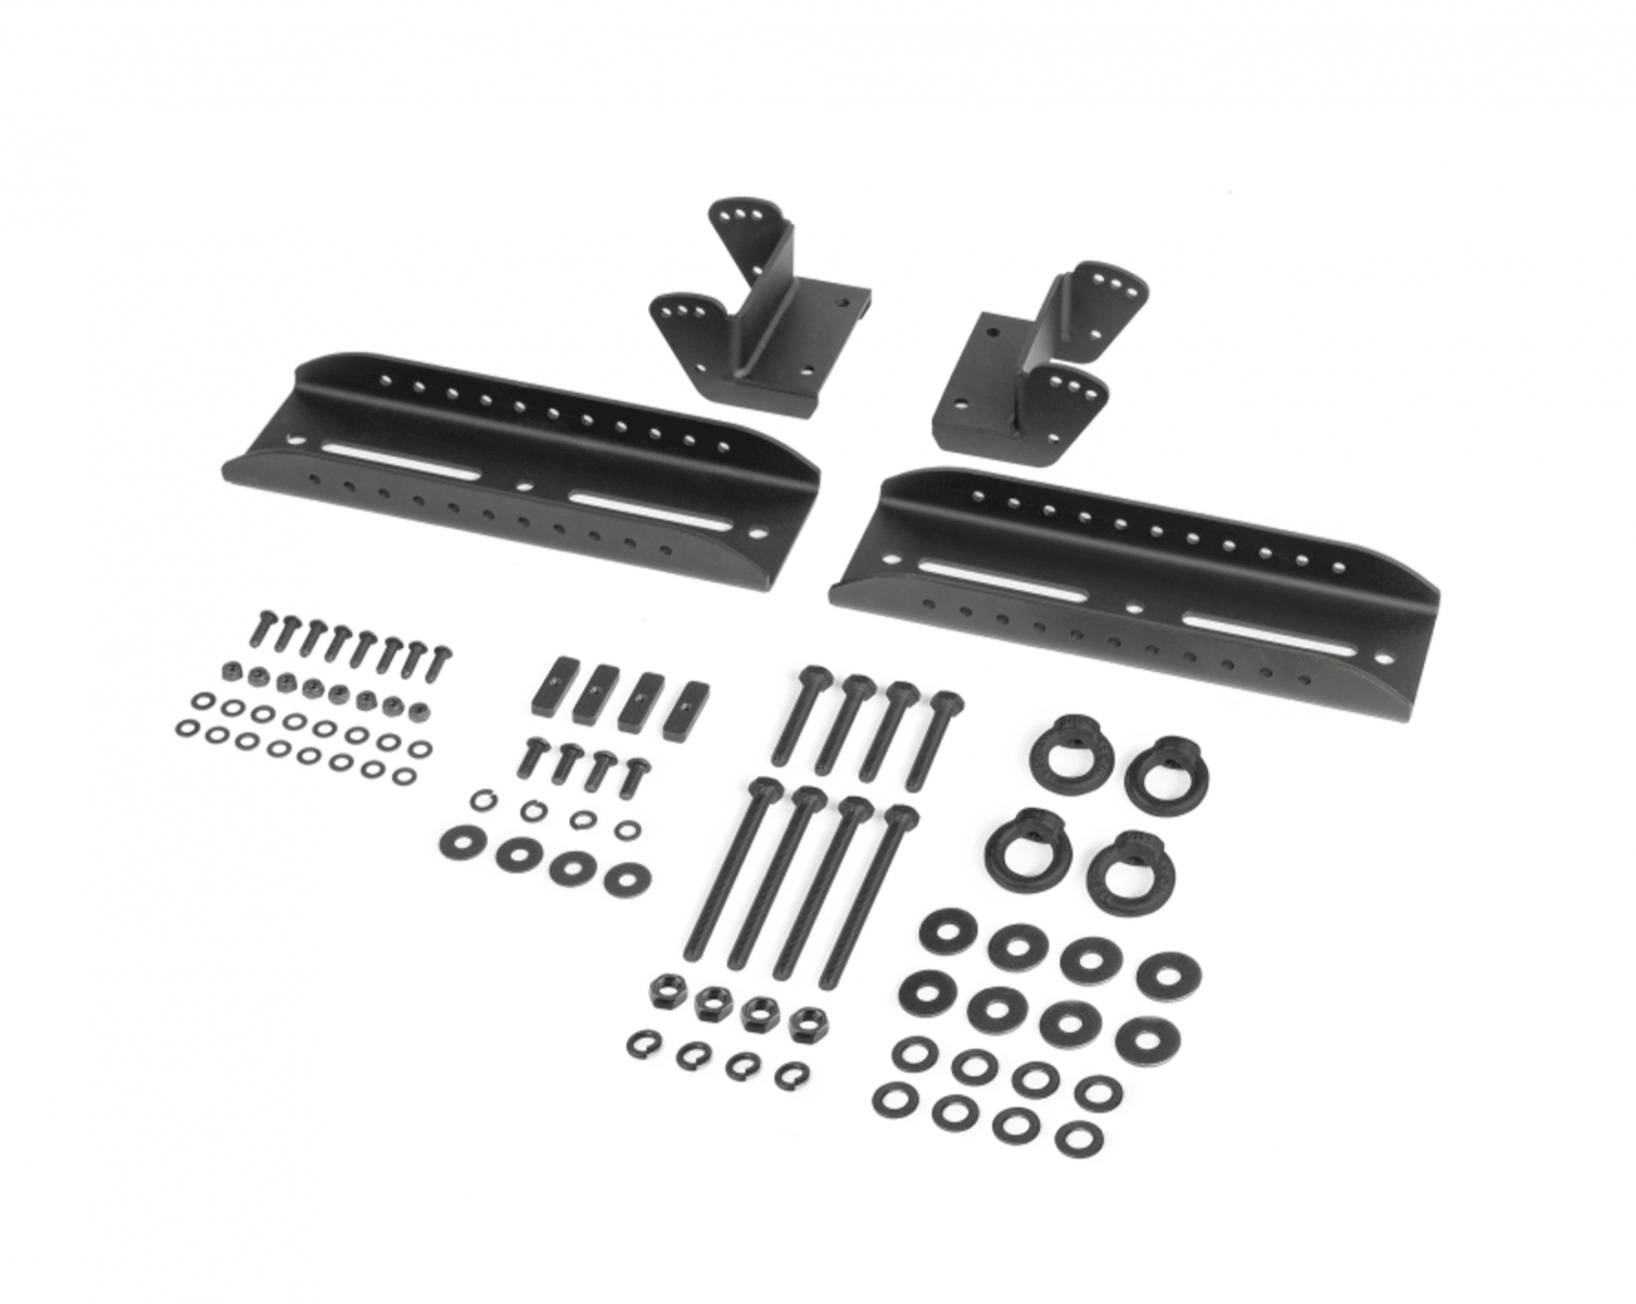 2MD.0011.1 Adjustable Recovery Boards Mount - RIVAL 4x4 USA